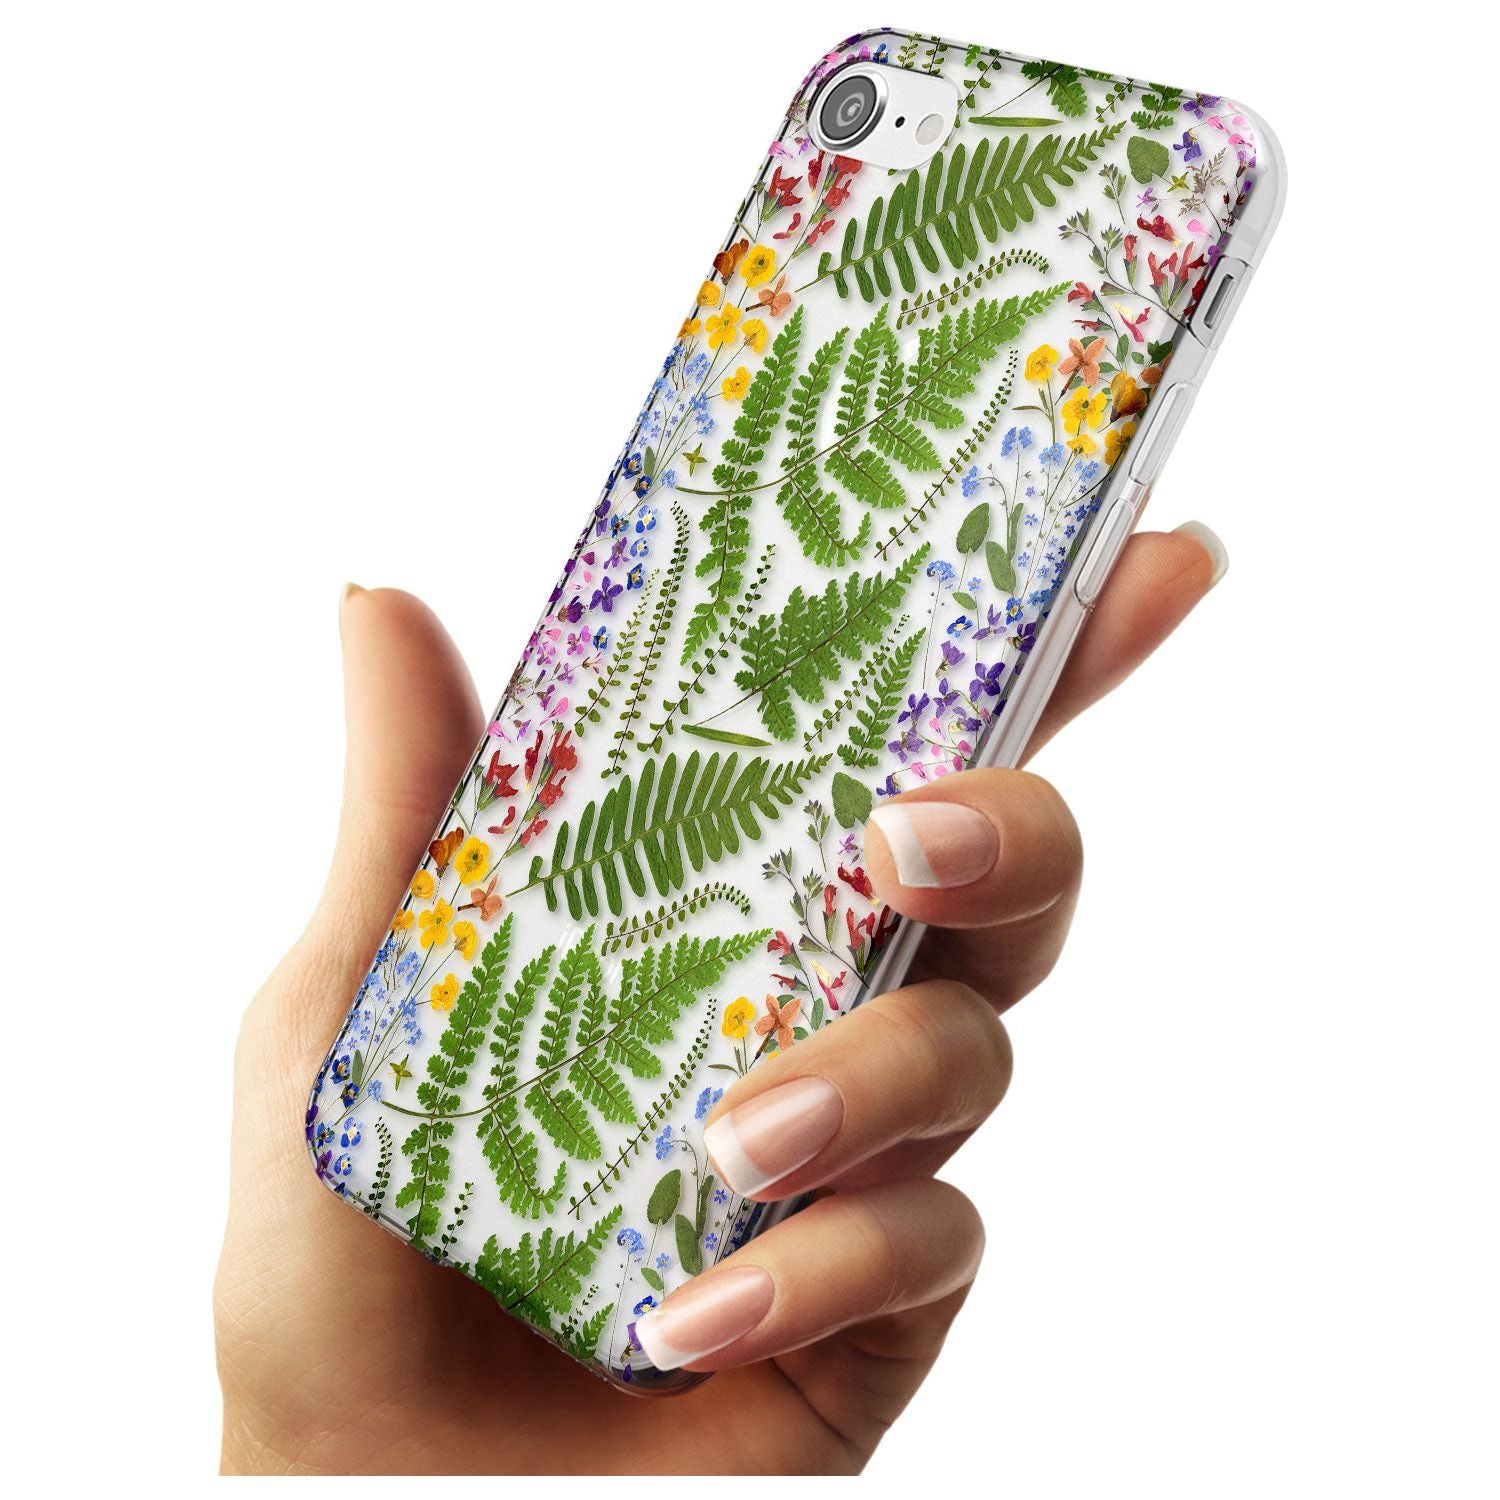 Busy Floral and Fern Design Slim TPU Phone Case for iPhone SE 8 7 Plus